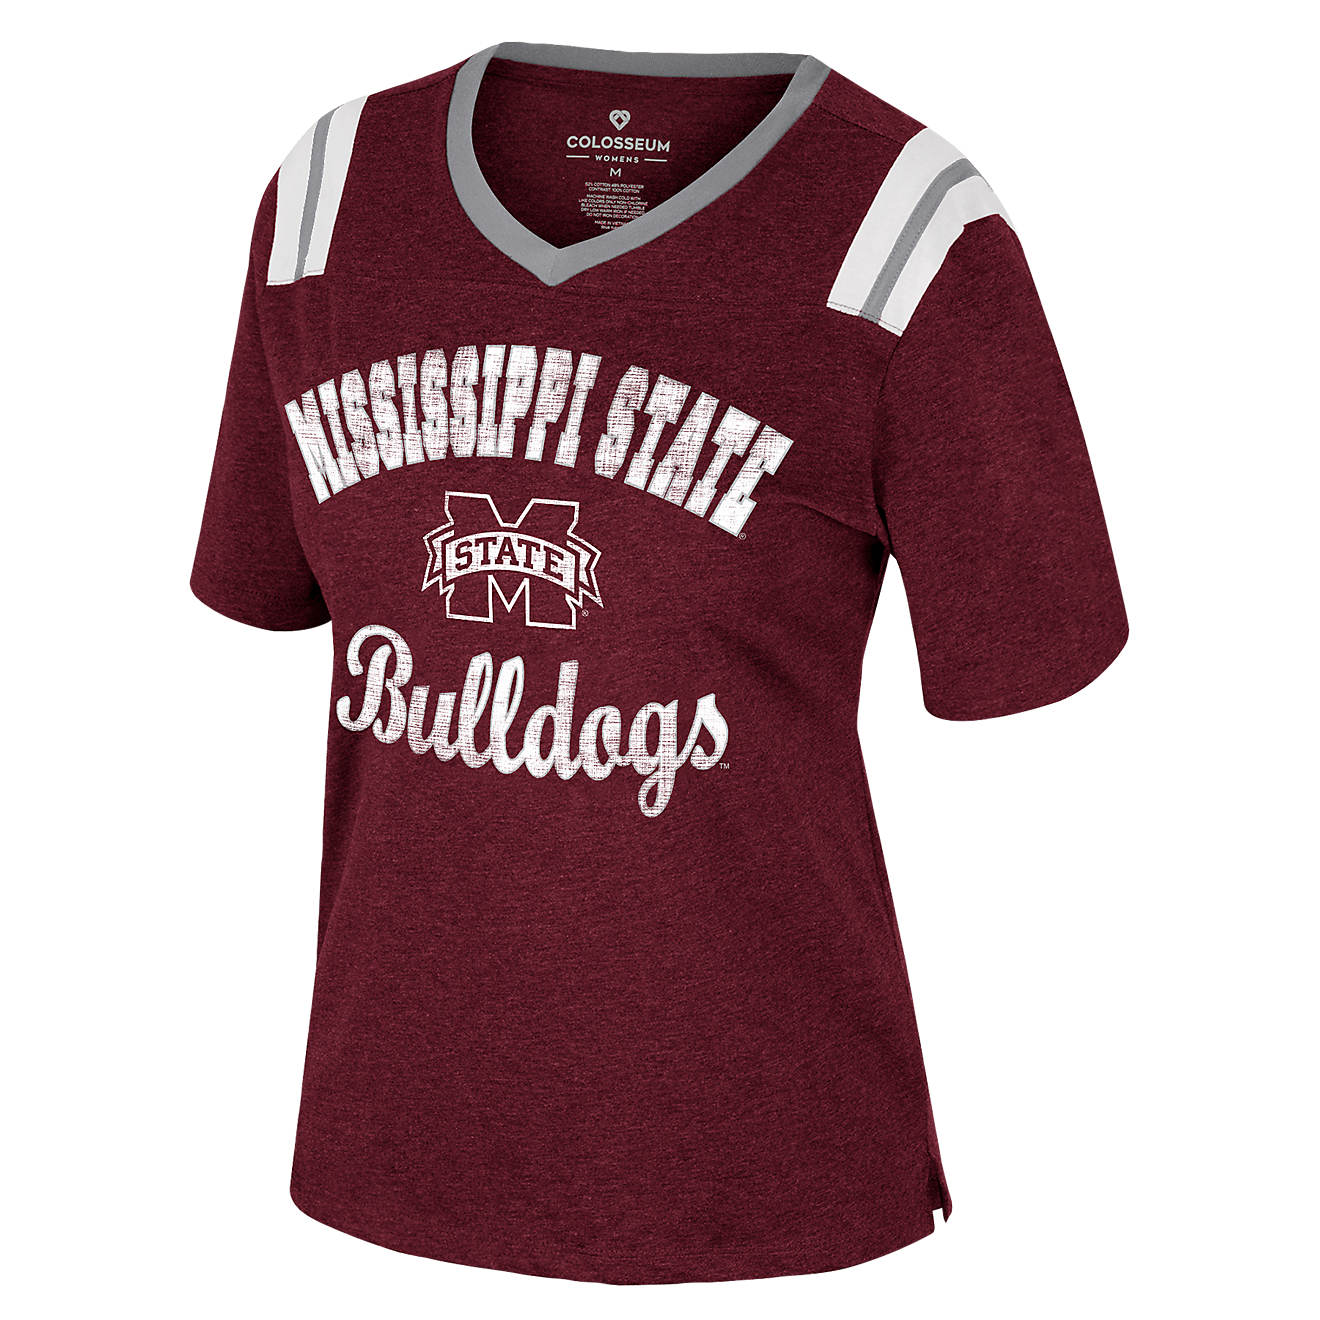 Colosseum Athletics Women's Mississippi State University Garden State T-shirt                                                    - view number 1